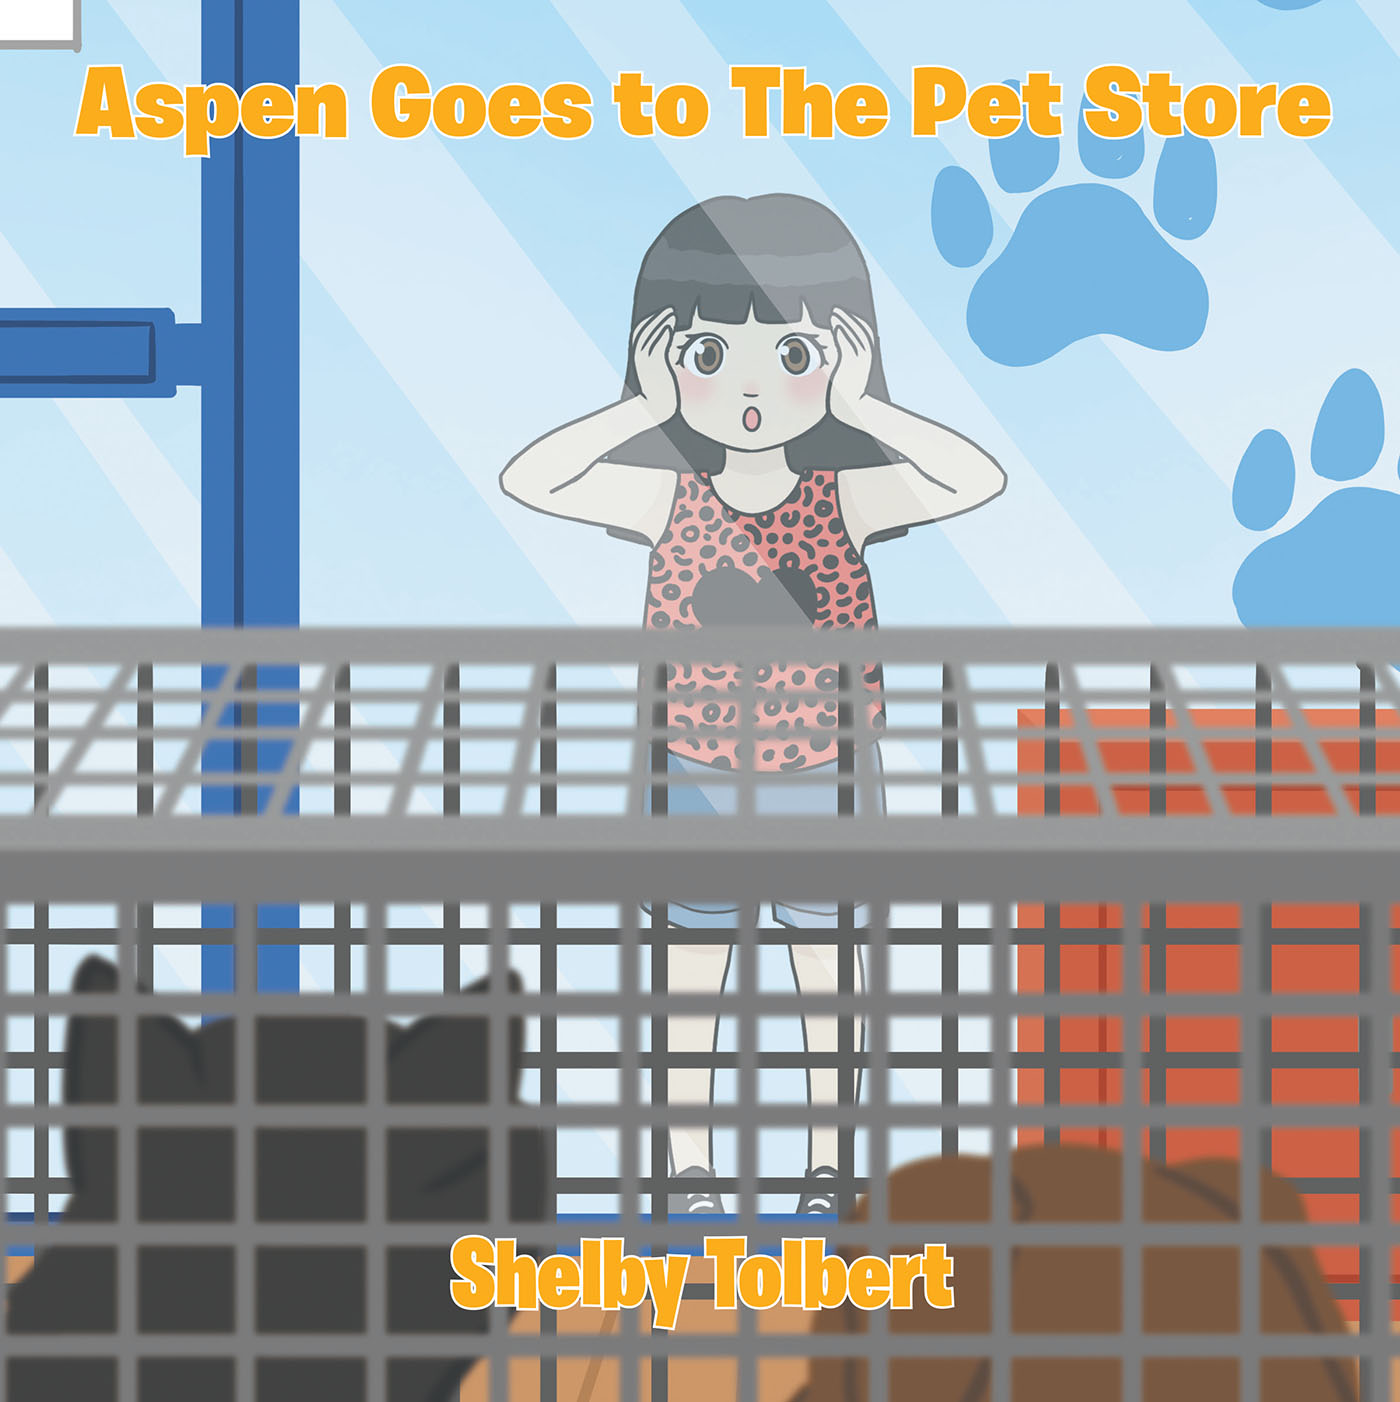 Shelby Tolbert’s New Book, "Aspen Goes to the Pet Store," is a Delightful Tale Centered Around a Little Girl Who Gets to Pick Out a New Best Friend to Bring Home